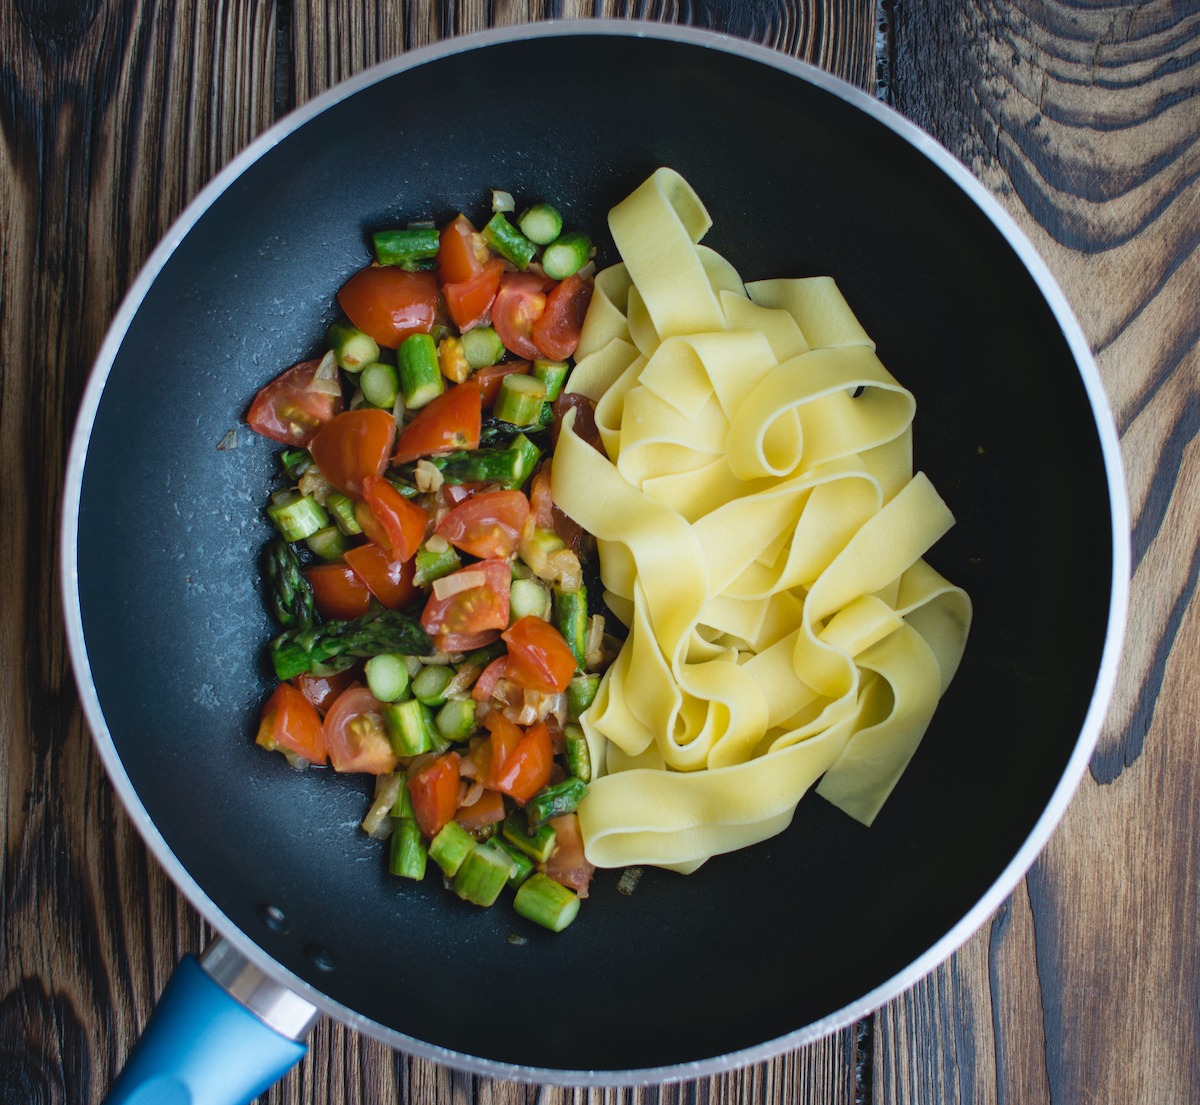 Vegetables And Pasta Go Great Together